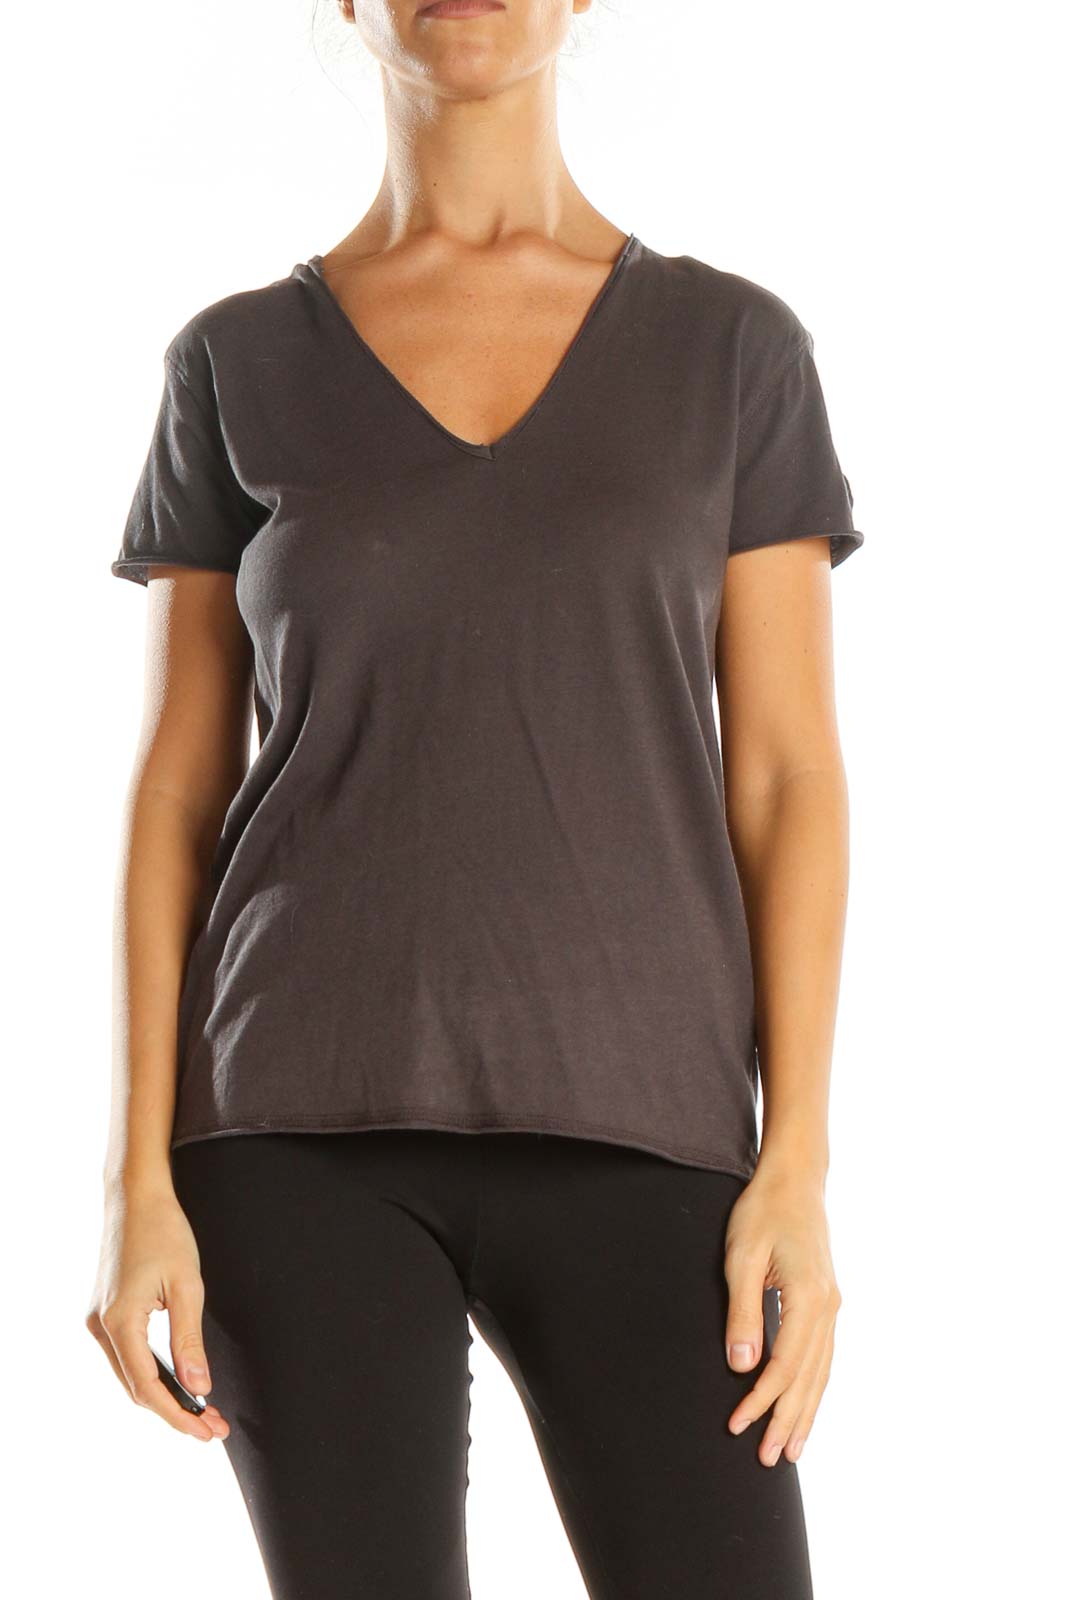 Gray Solid Casual T-Shirt Front